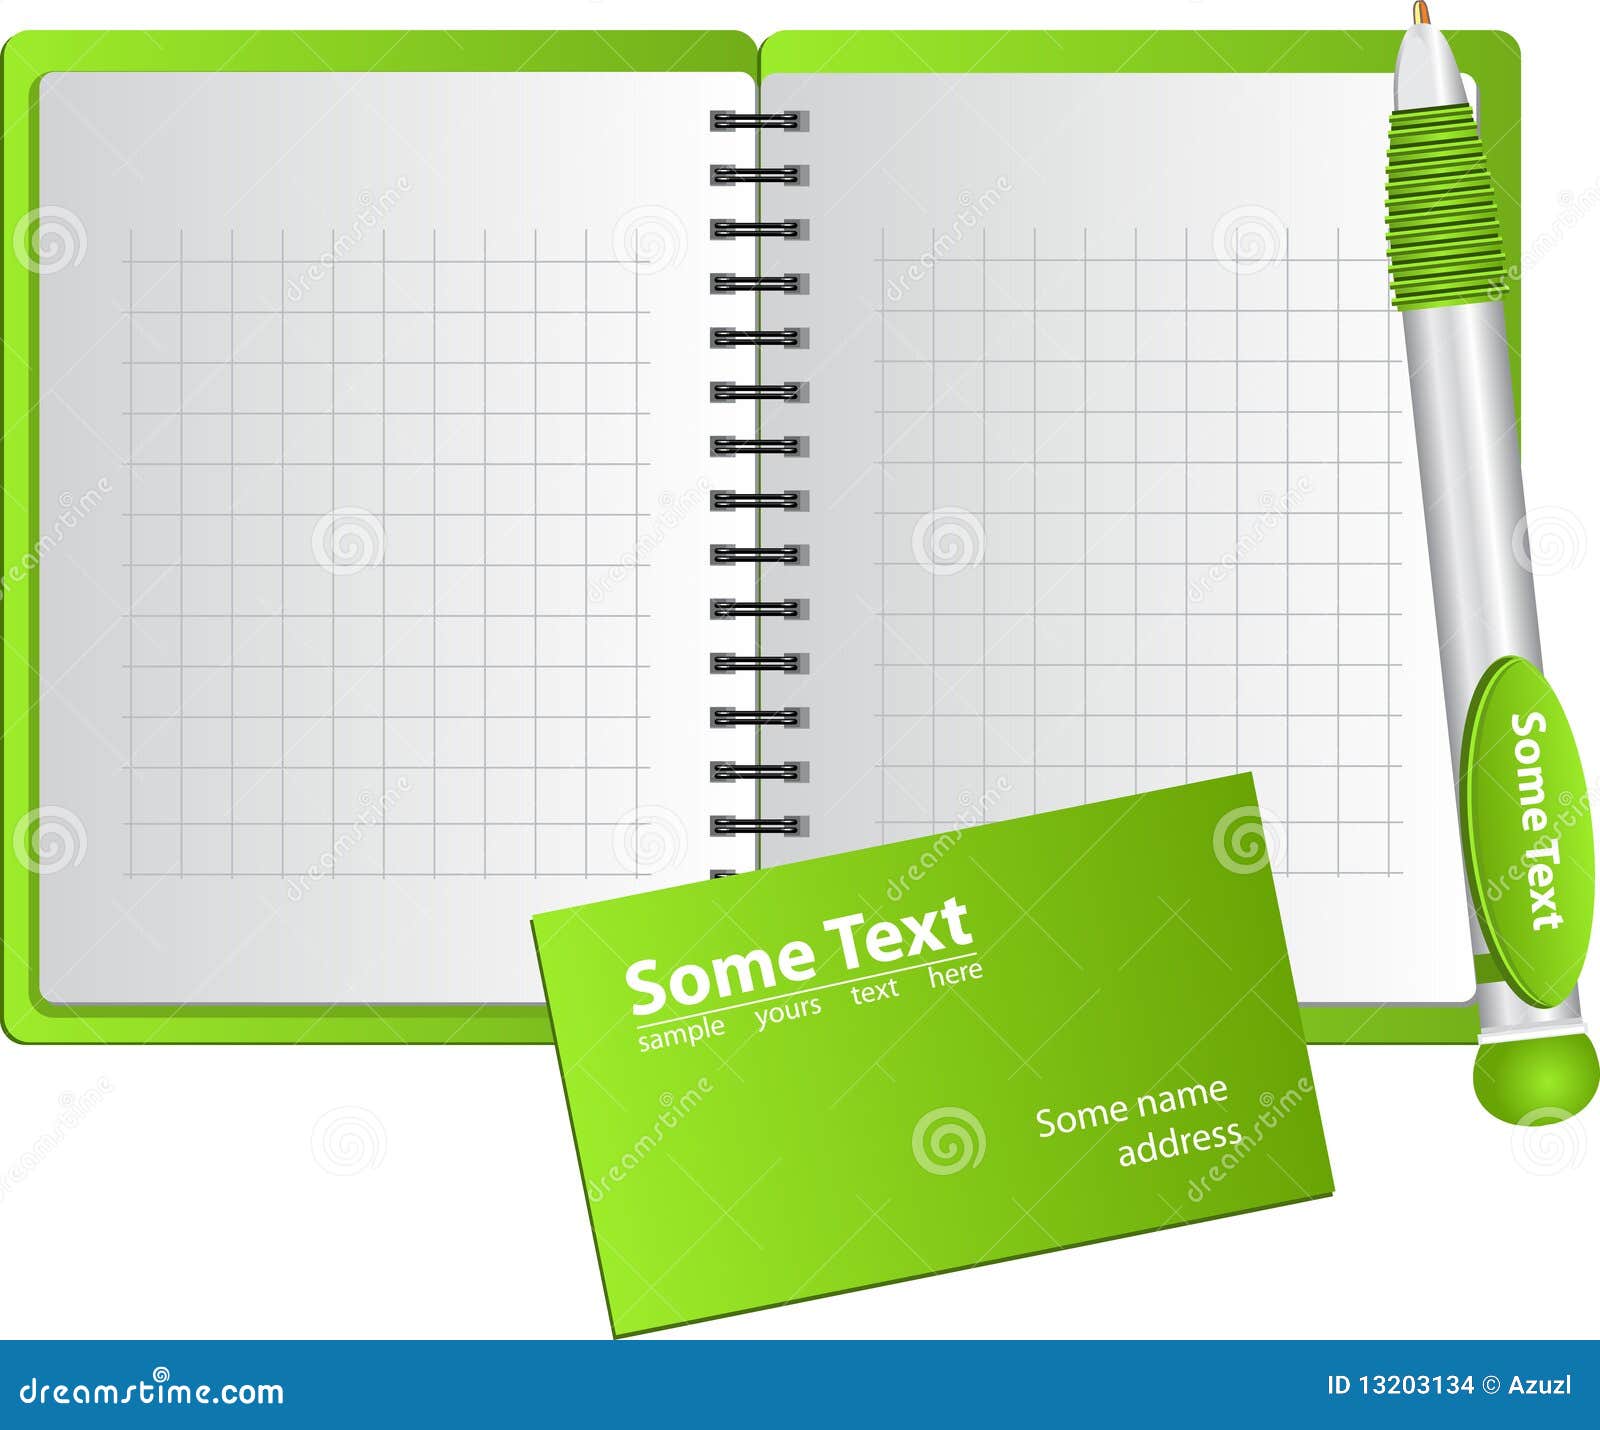 Green Background From Notebook With Pen Stock Vector - Illustration of